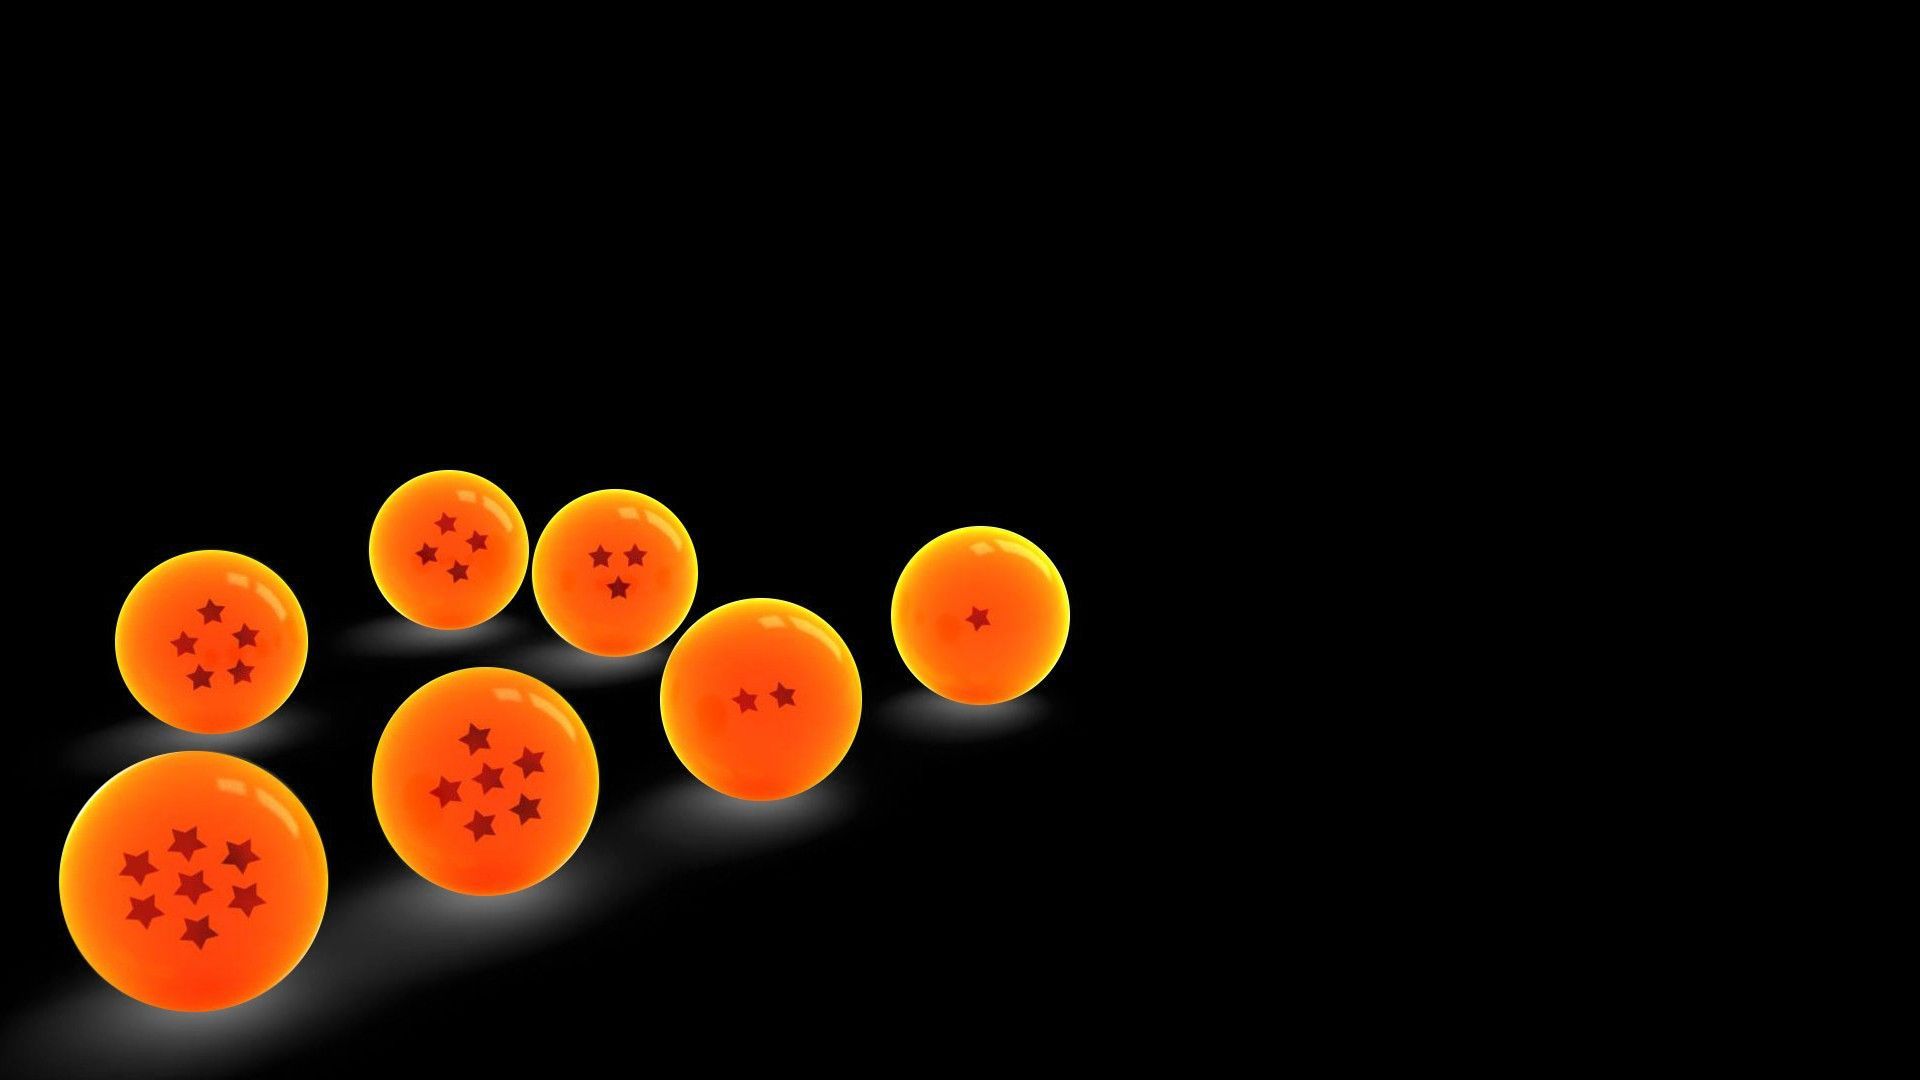 Orange balls on a black background wallpapers and images ...